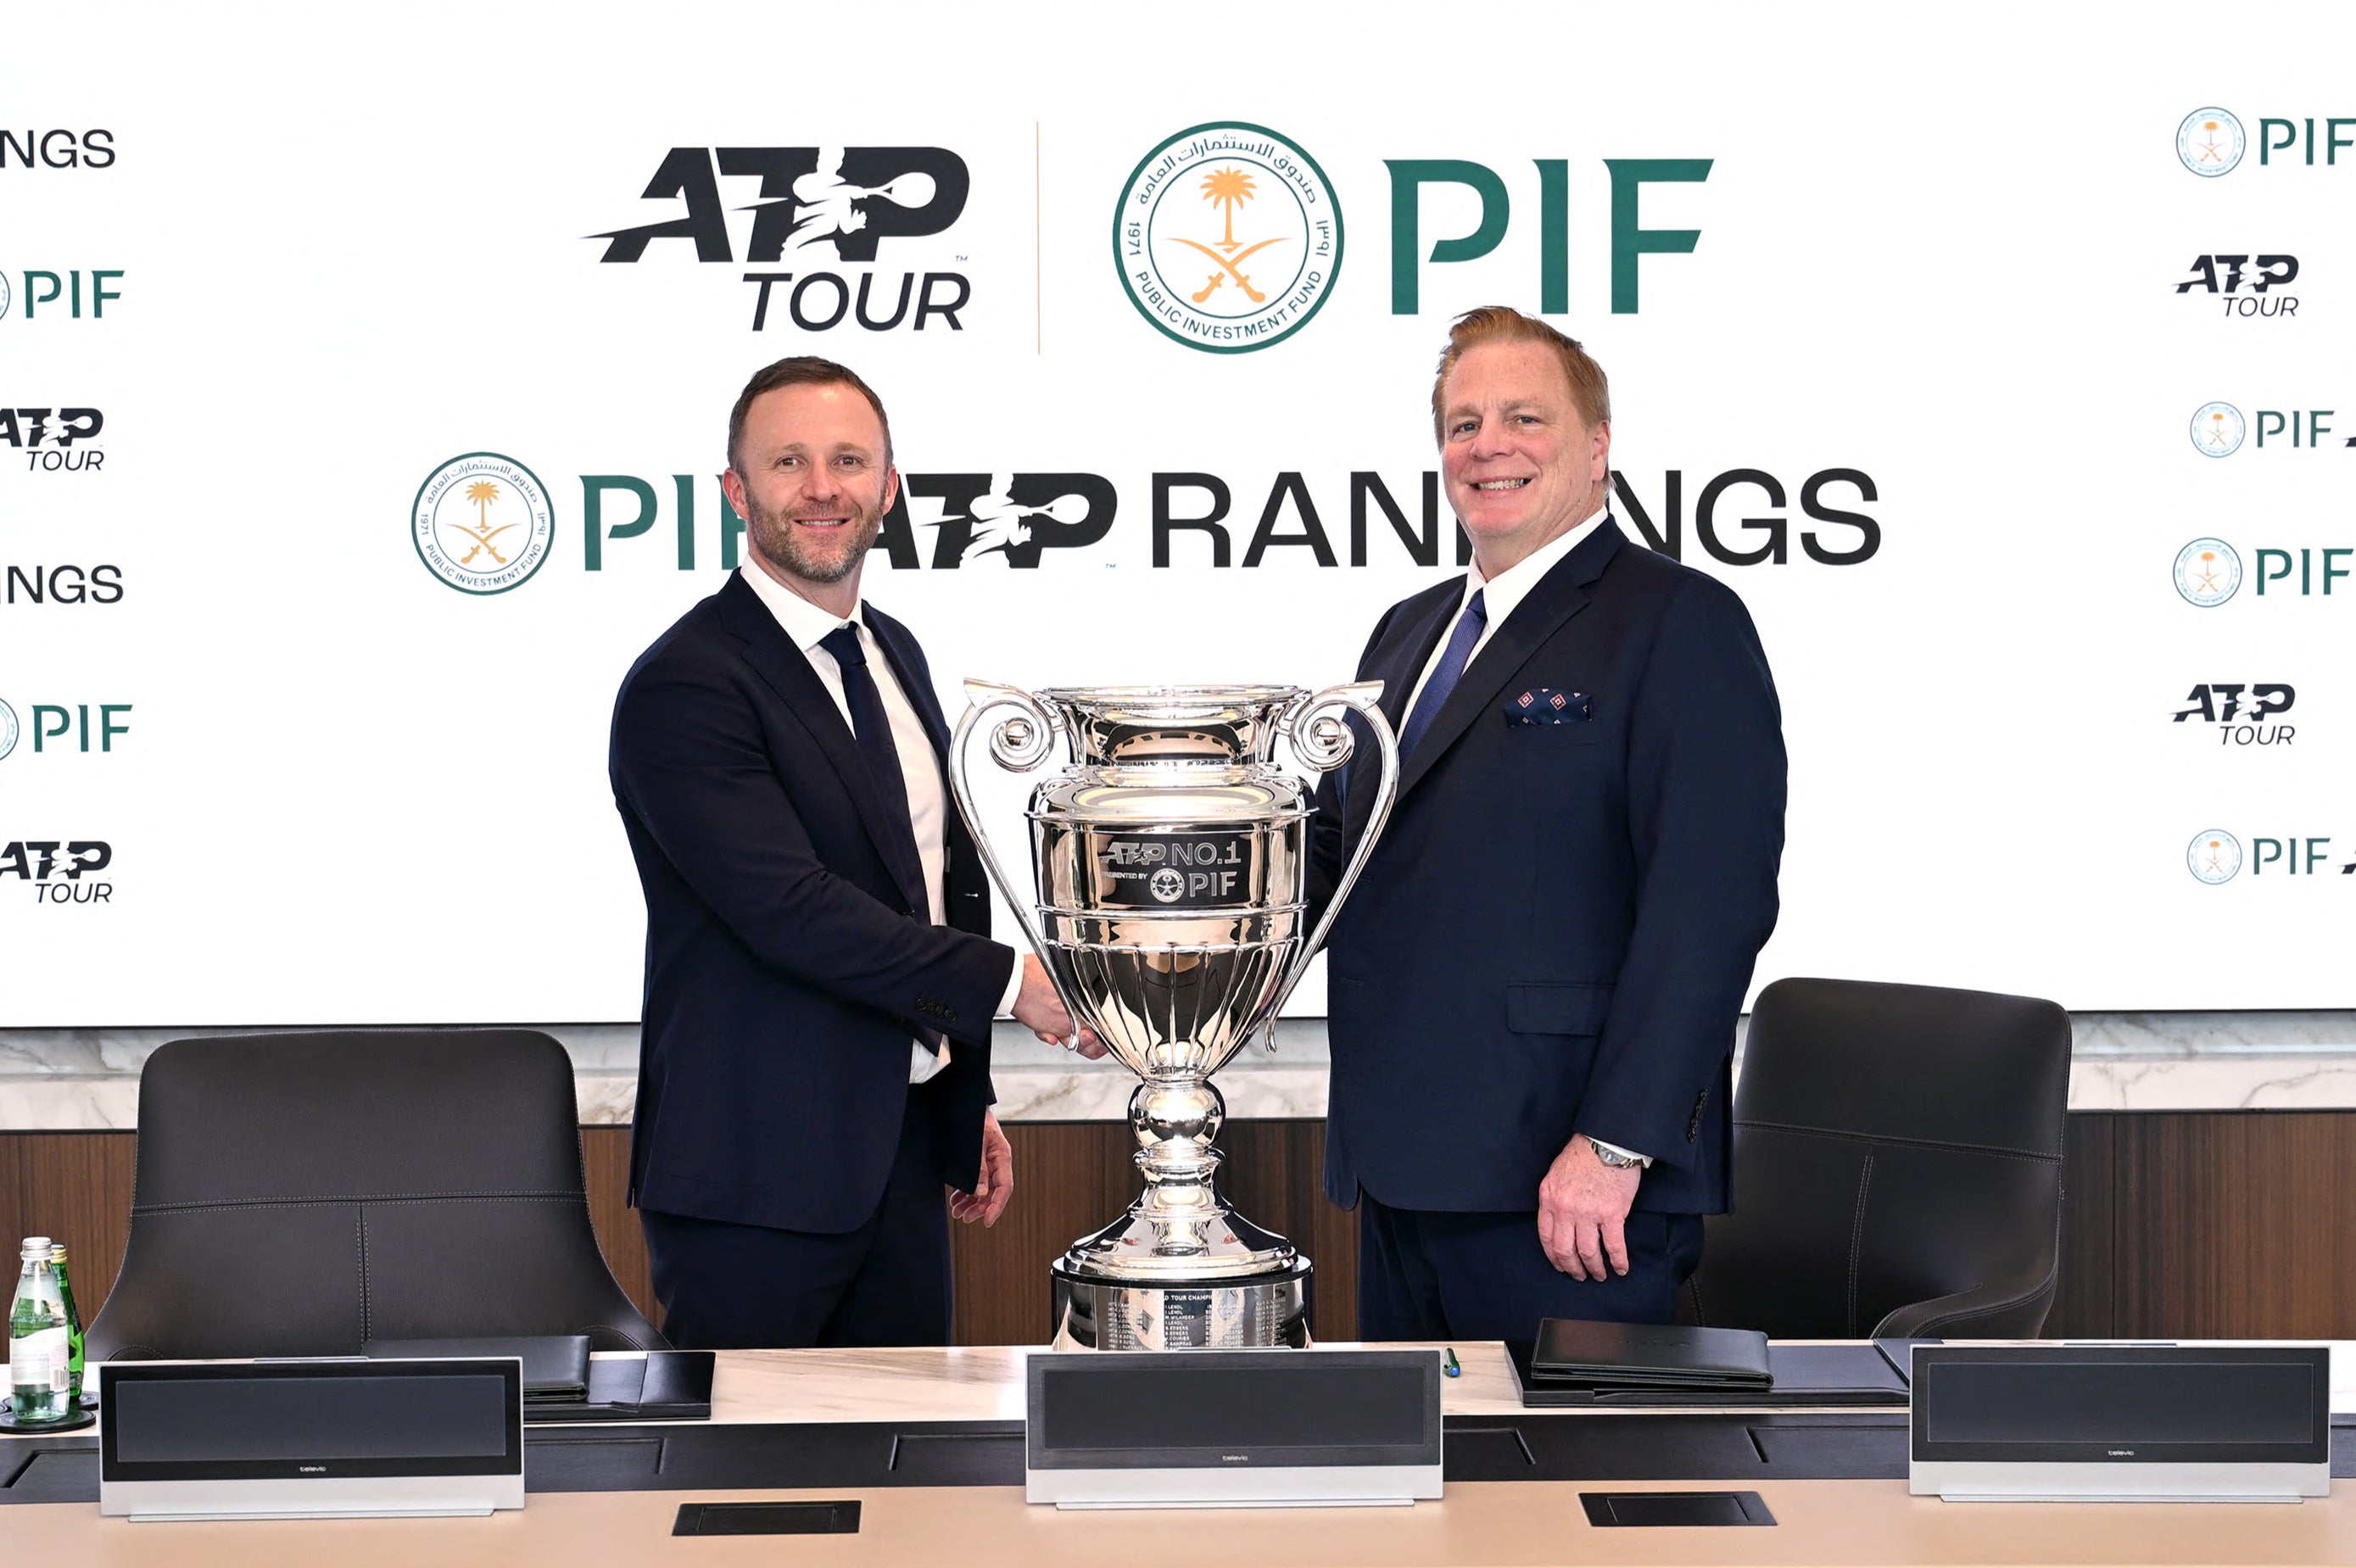 A deal has been struck that will see PIF partner a number of ATP events